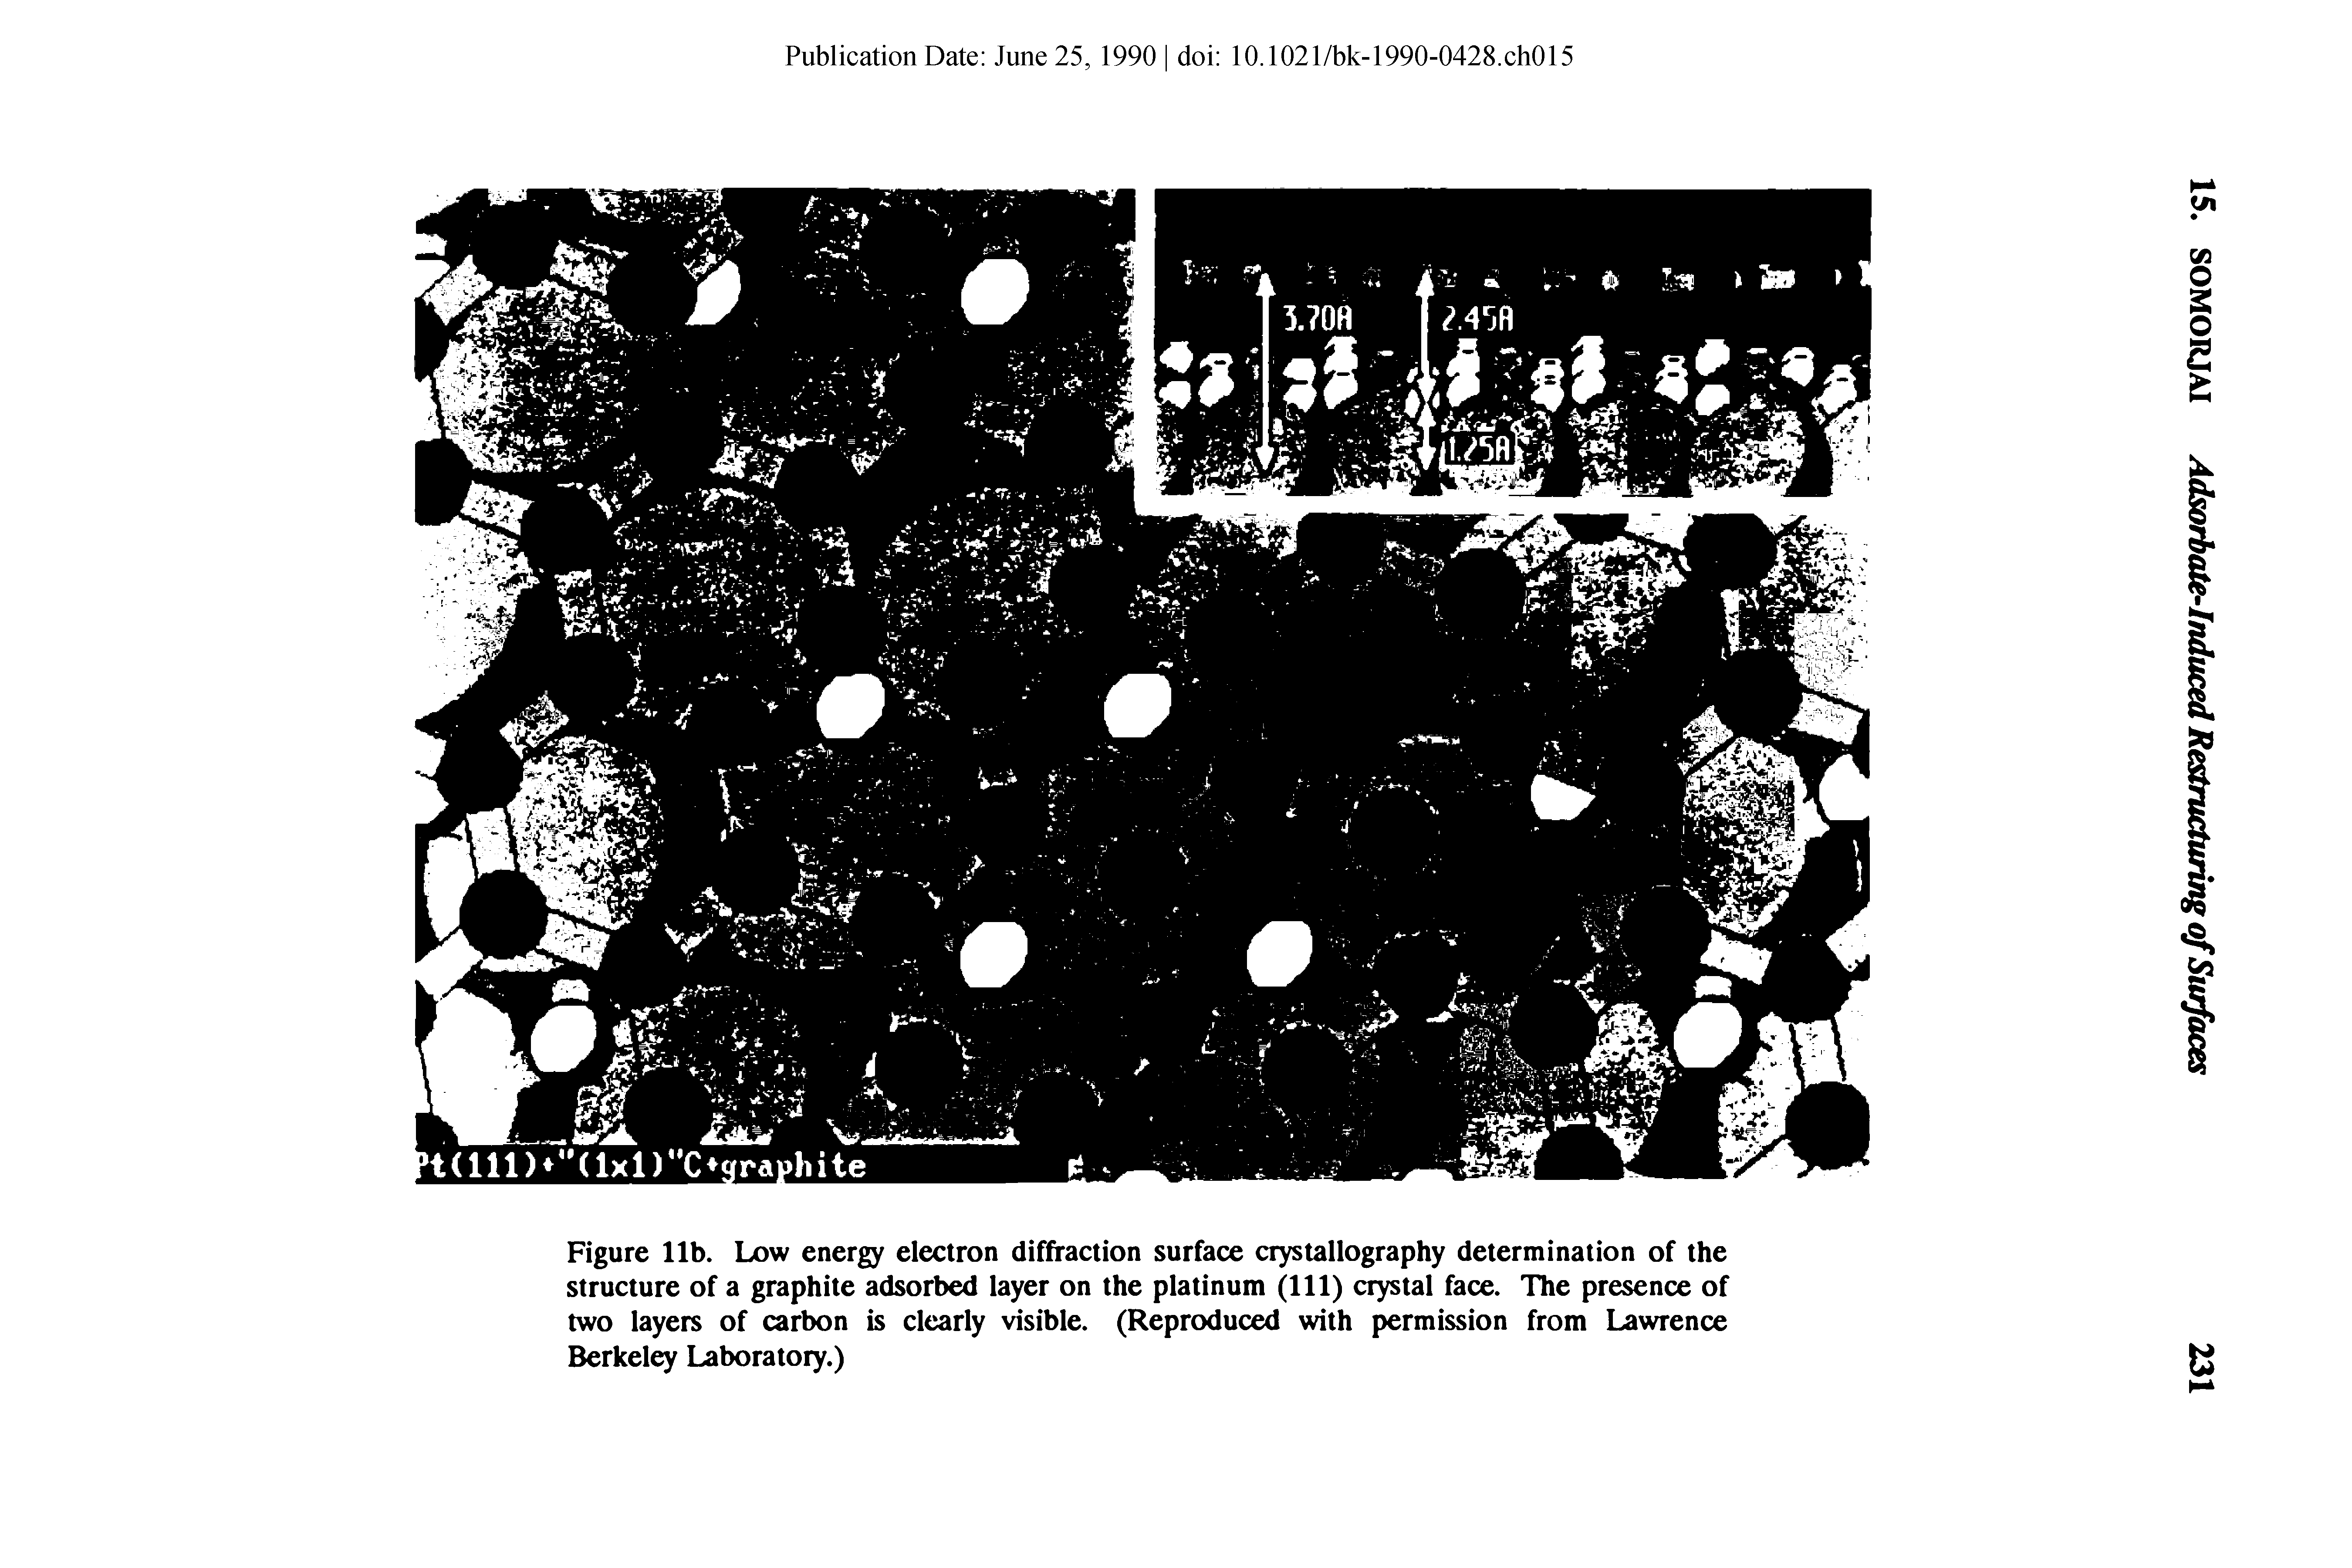 Figure 11b. Low energy electron diffraction surface crystallography determination of the structure of a graphite adsorbed layer on the platinum (111) crystal face. The presence of two layers of carbon is clearly visible. (Reproduced with permission from Lawrence Berkeley Laboratory.)...